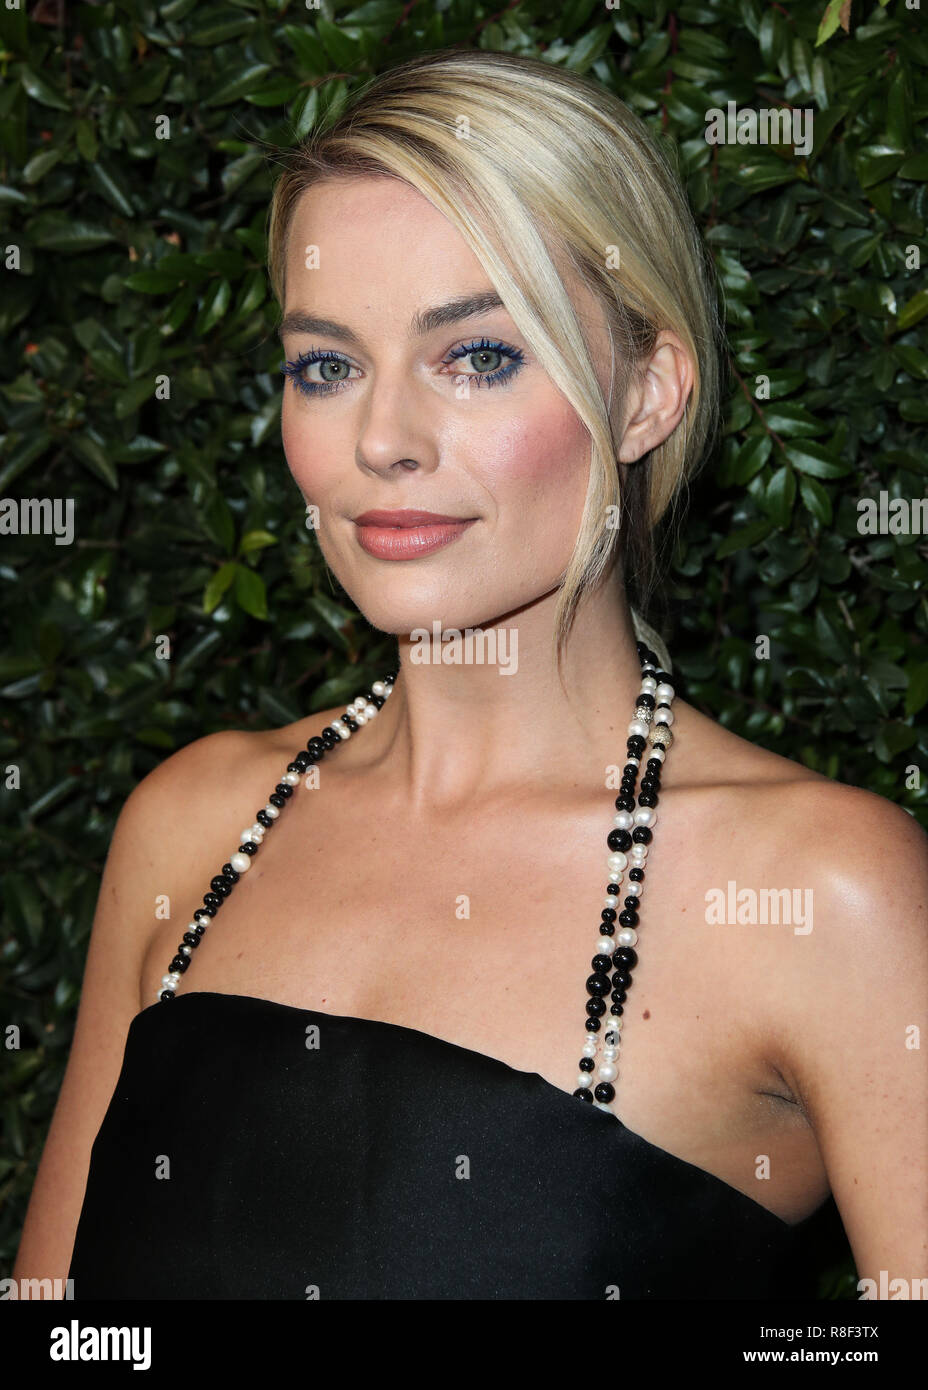 BEVERLY HILLS, LOS ANGELES, CA, USA - MARCH 03: Margot Robbie at the Chanel And Charles Finch Pre-Oscar Awards Dinner 2018 held at Madeo Restaurant on March 3, 2018 in Beverly Hills, Los Angeles, California, United States. (Photo by Xavier Collin/Image Press Agency) Stock Photo